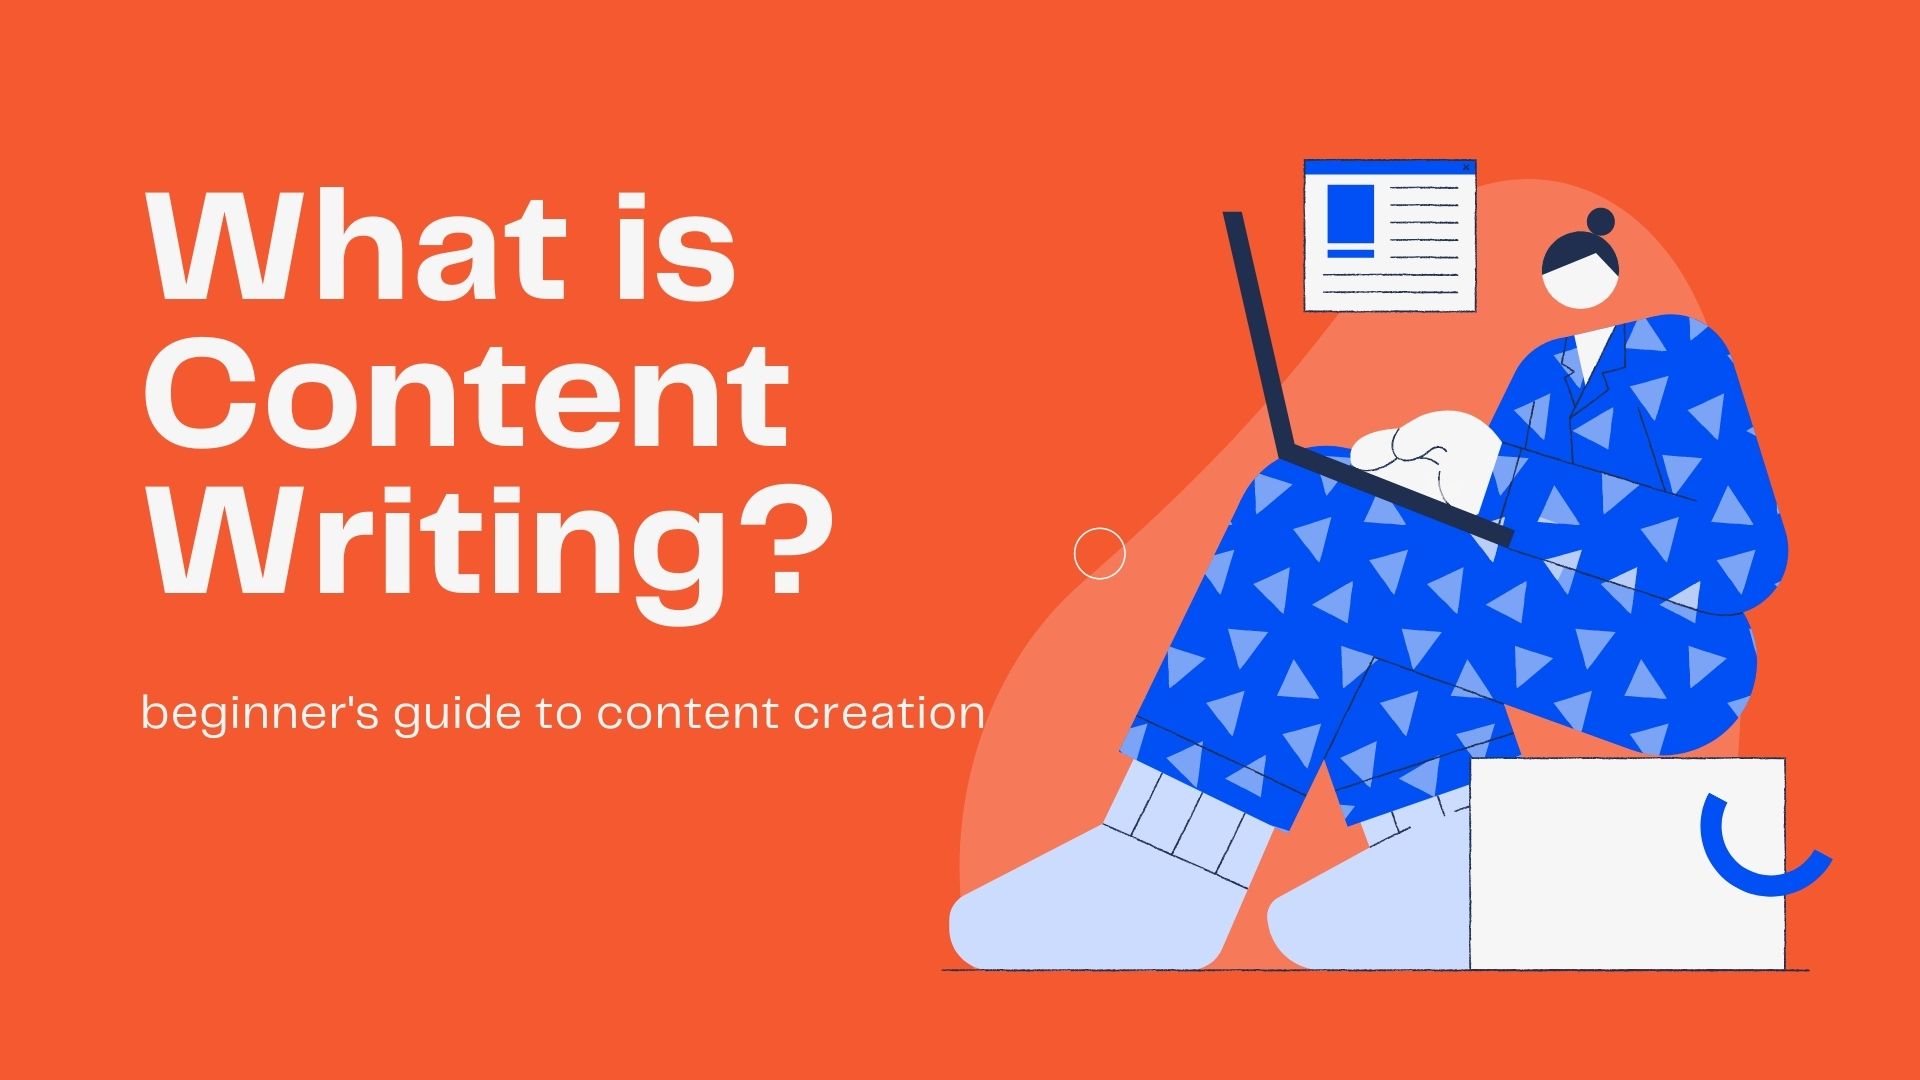 About Content Writing